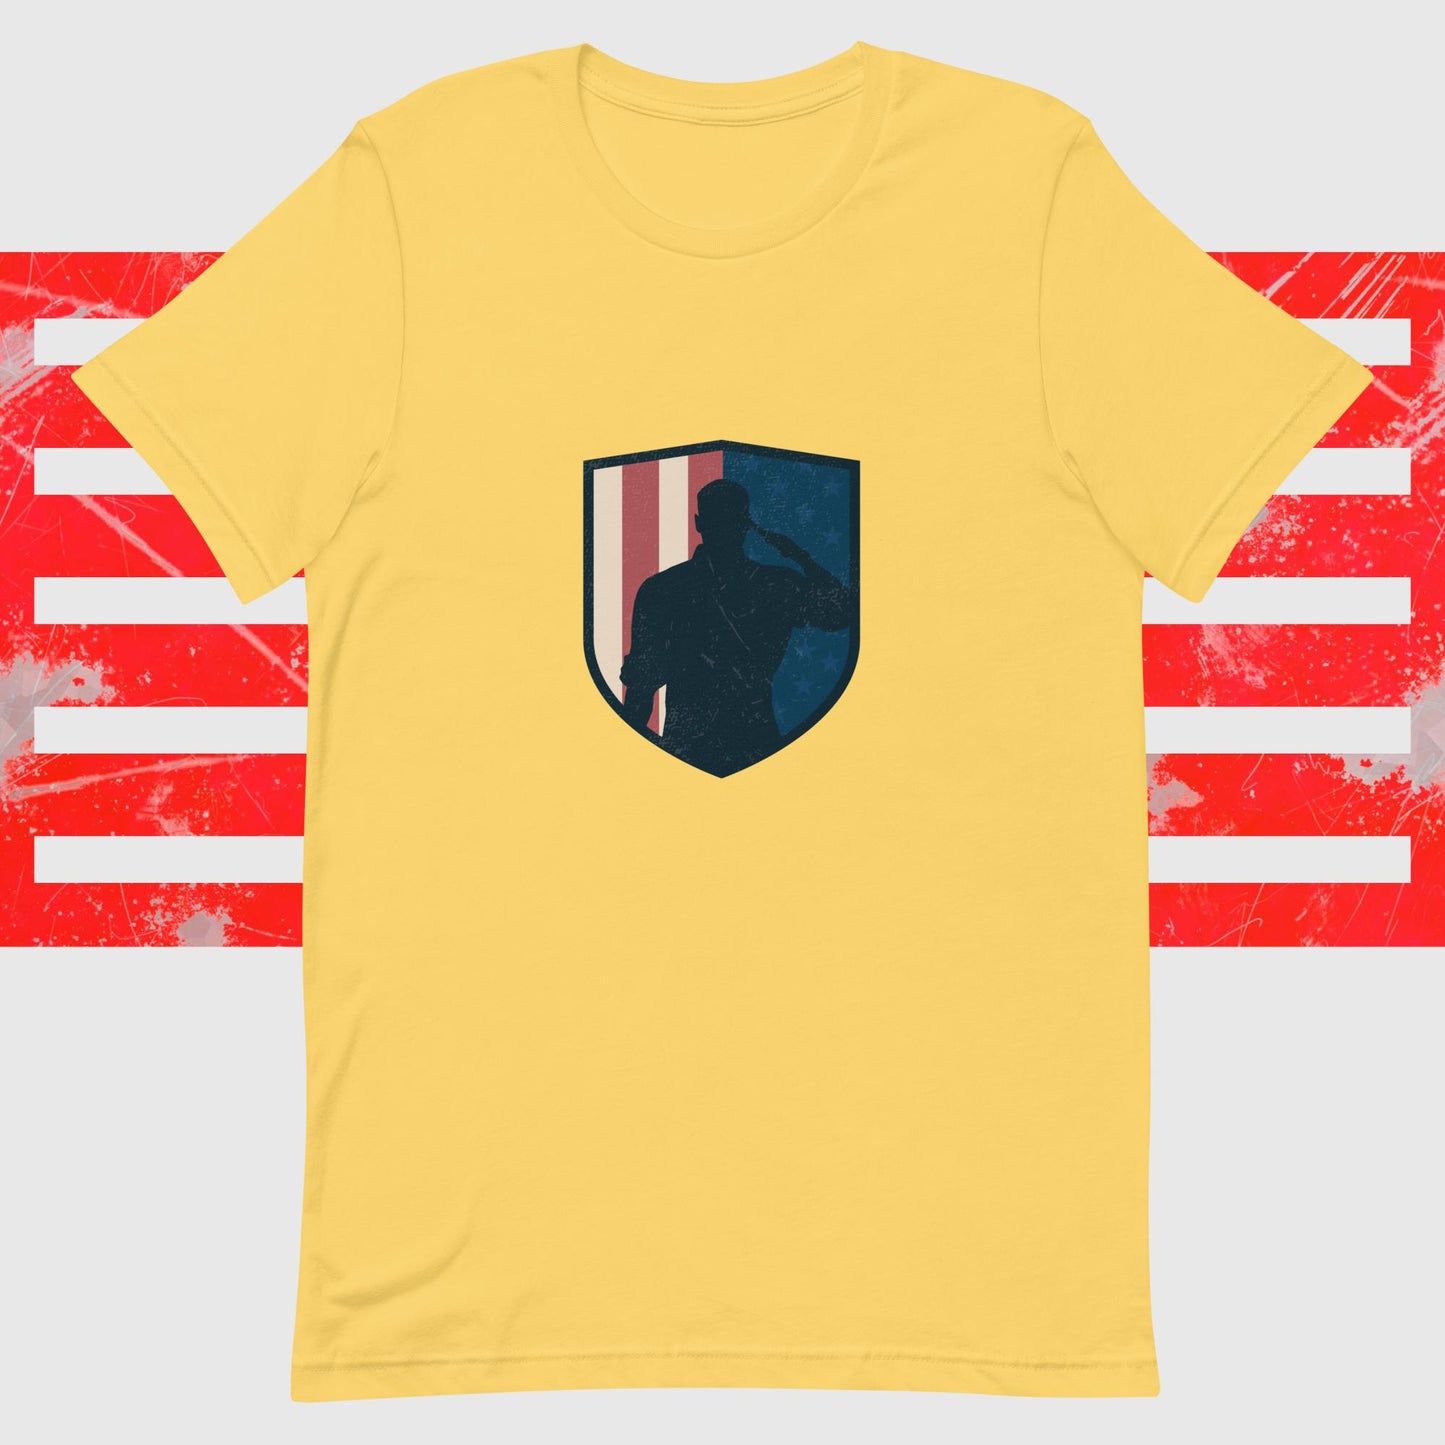 PATRIOTIC T-SHIRT AMERICAN SOLDIER LOGO YELLOW FRONT - www.firstamericanstore.com